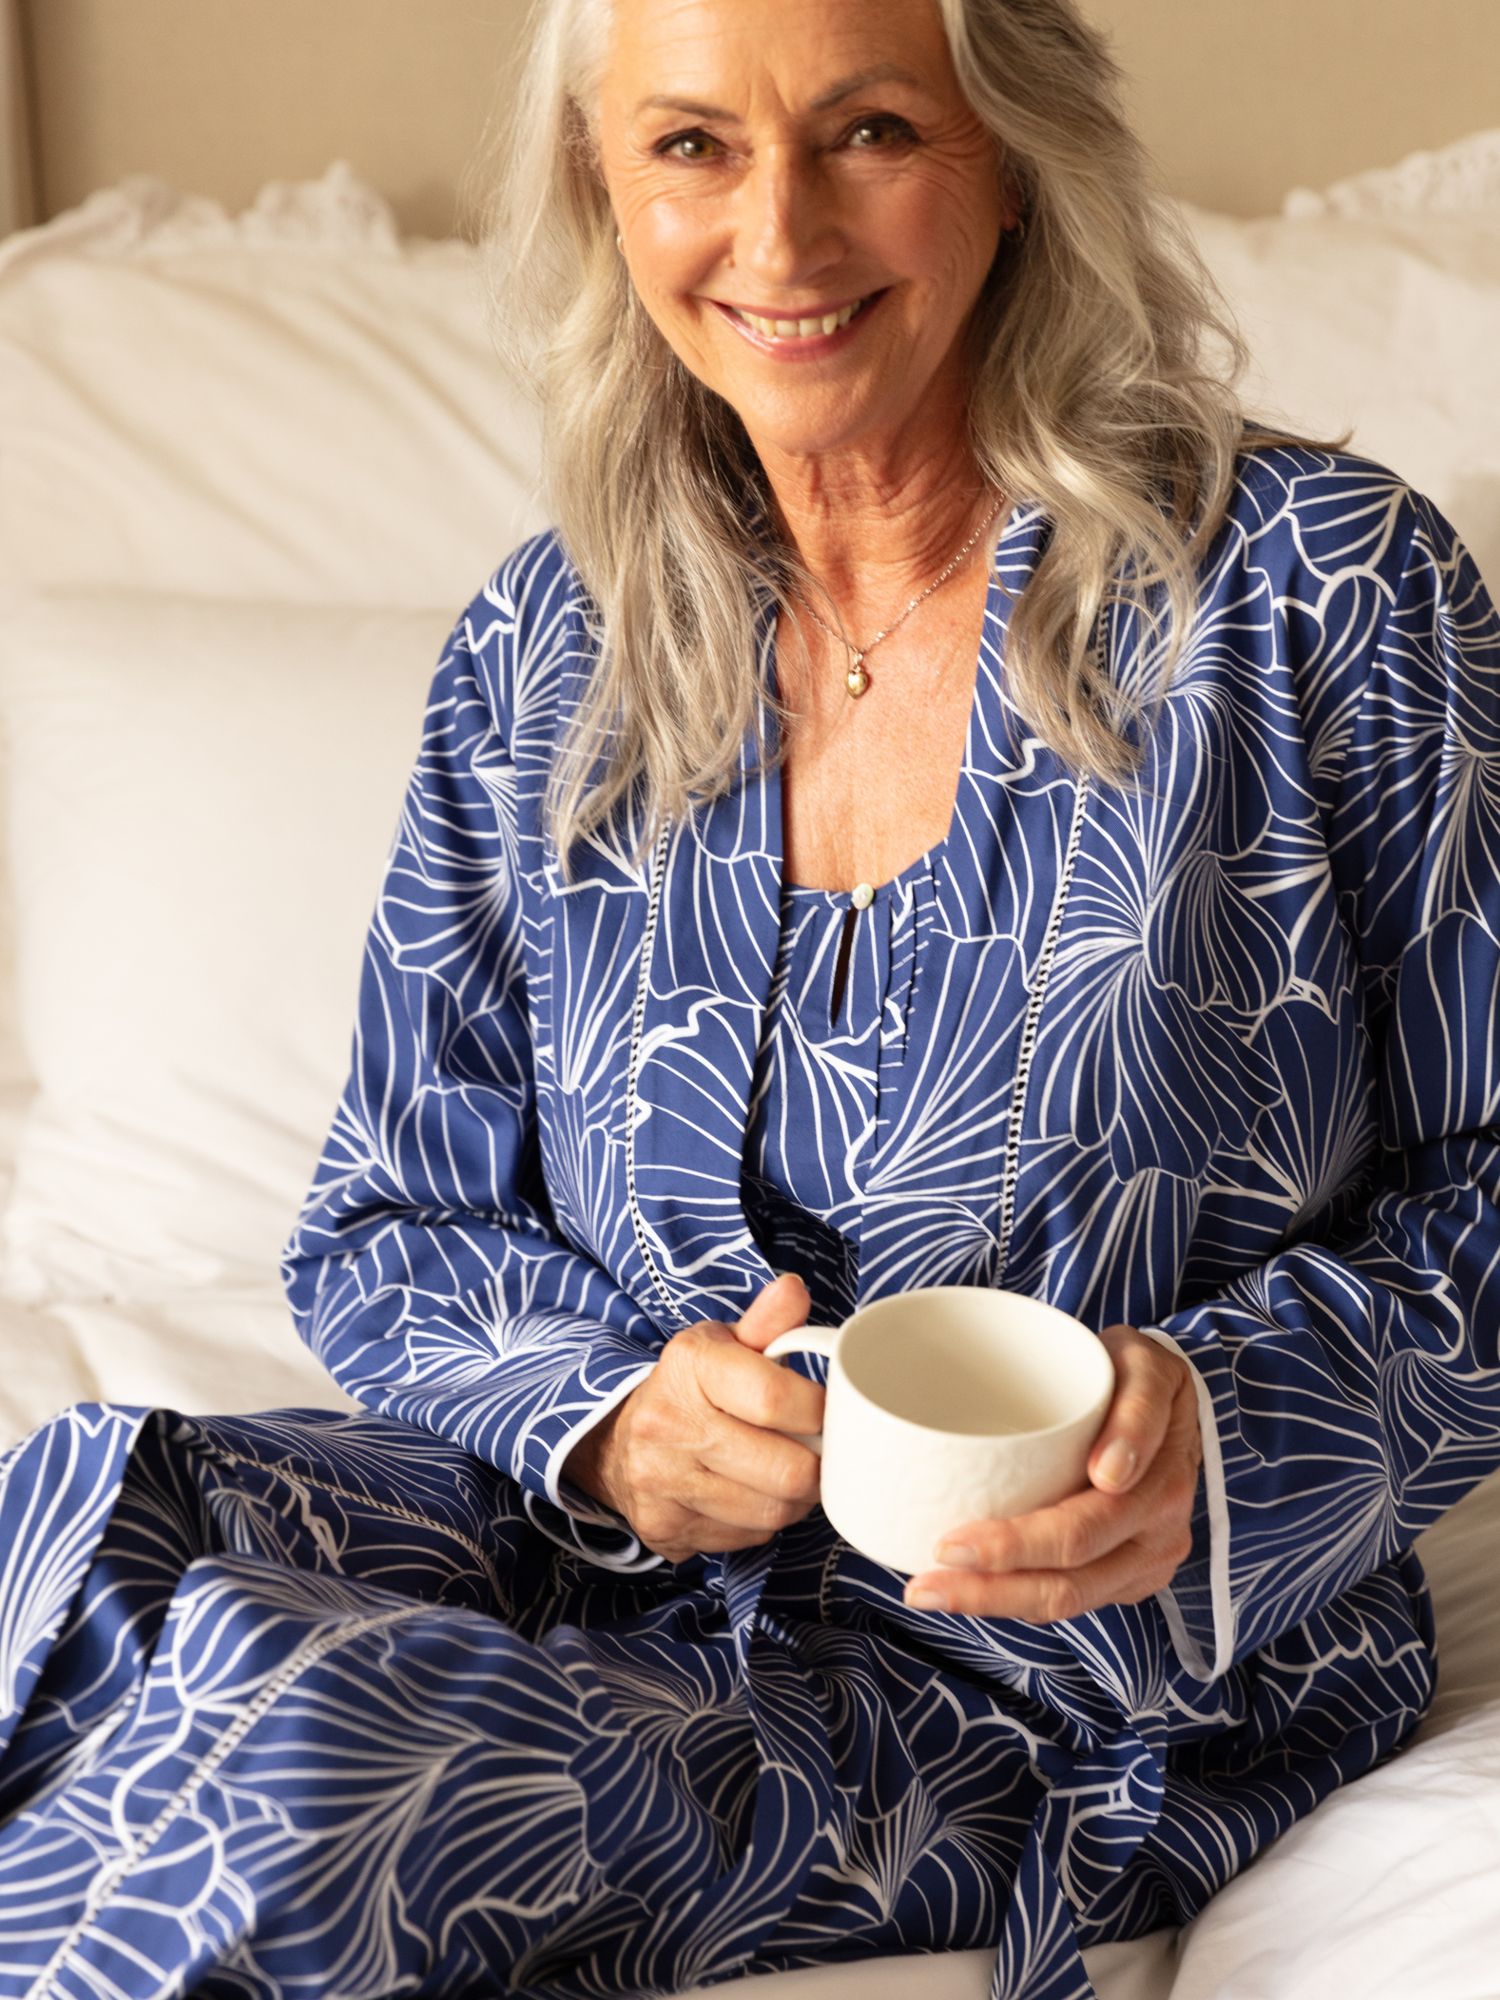 Buy Nora Rose by Cyberjammies Ceclia Shell Geometric Print Dressing Gown, Navy Online at johnlewis.com